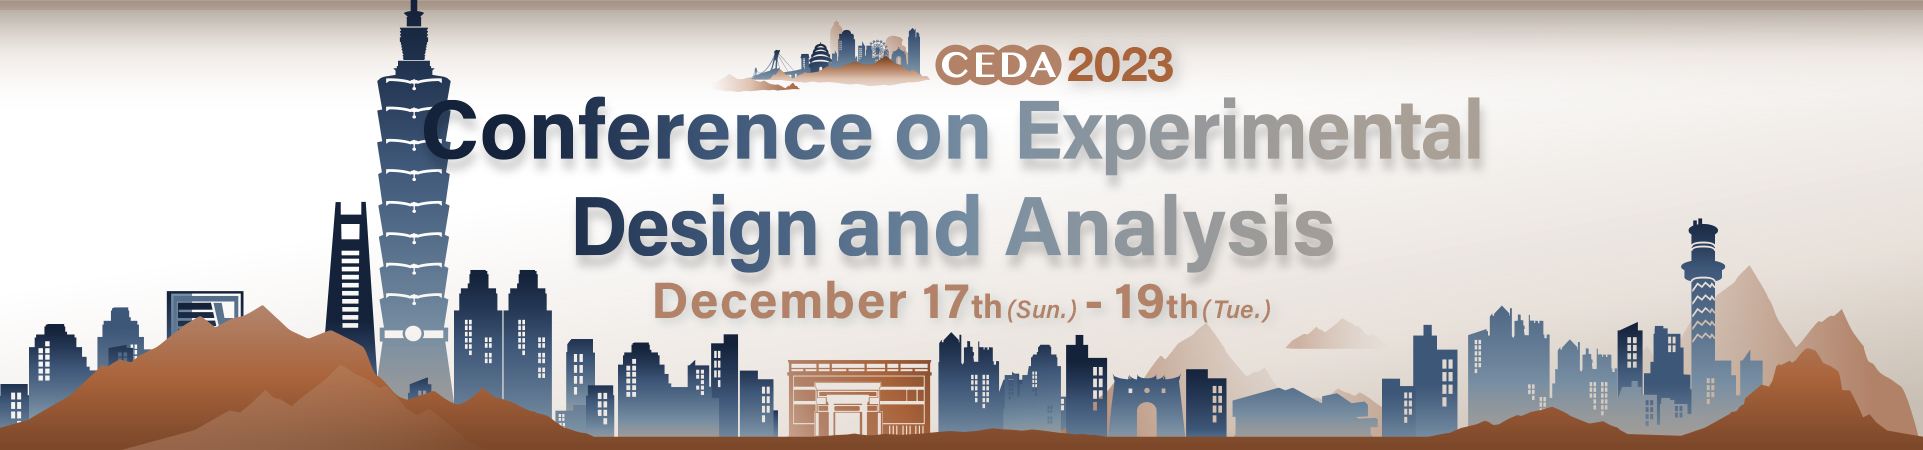 2023 Conference on Experimental Design and Analysis